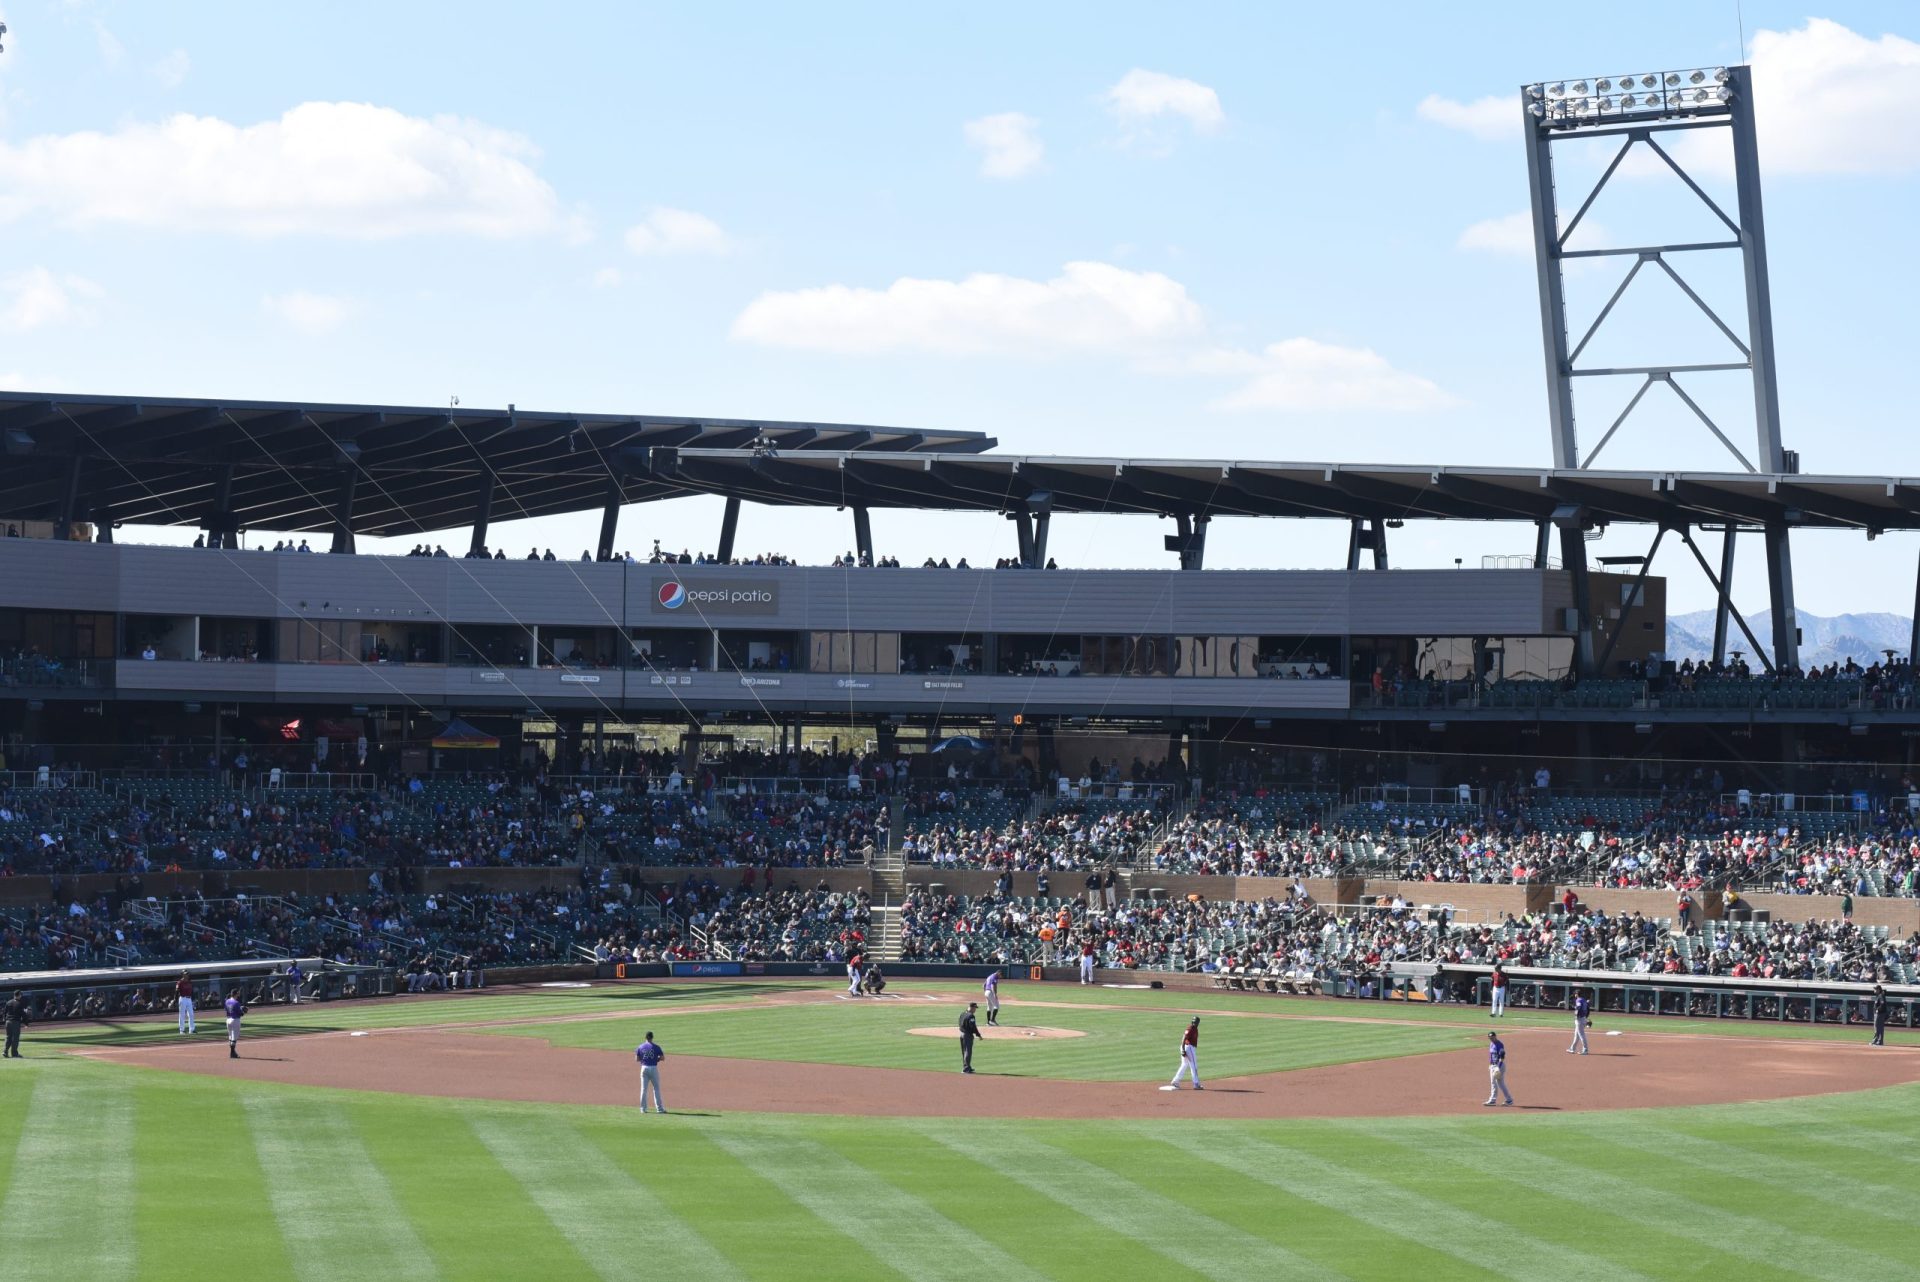 Spring Training Games Delayed After Letter to MLB